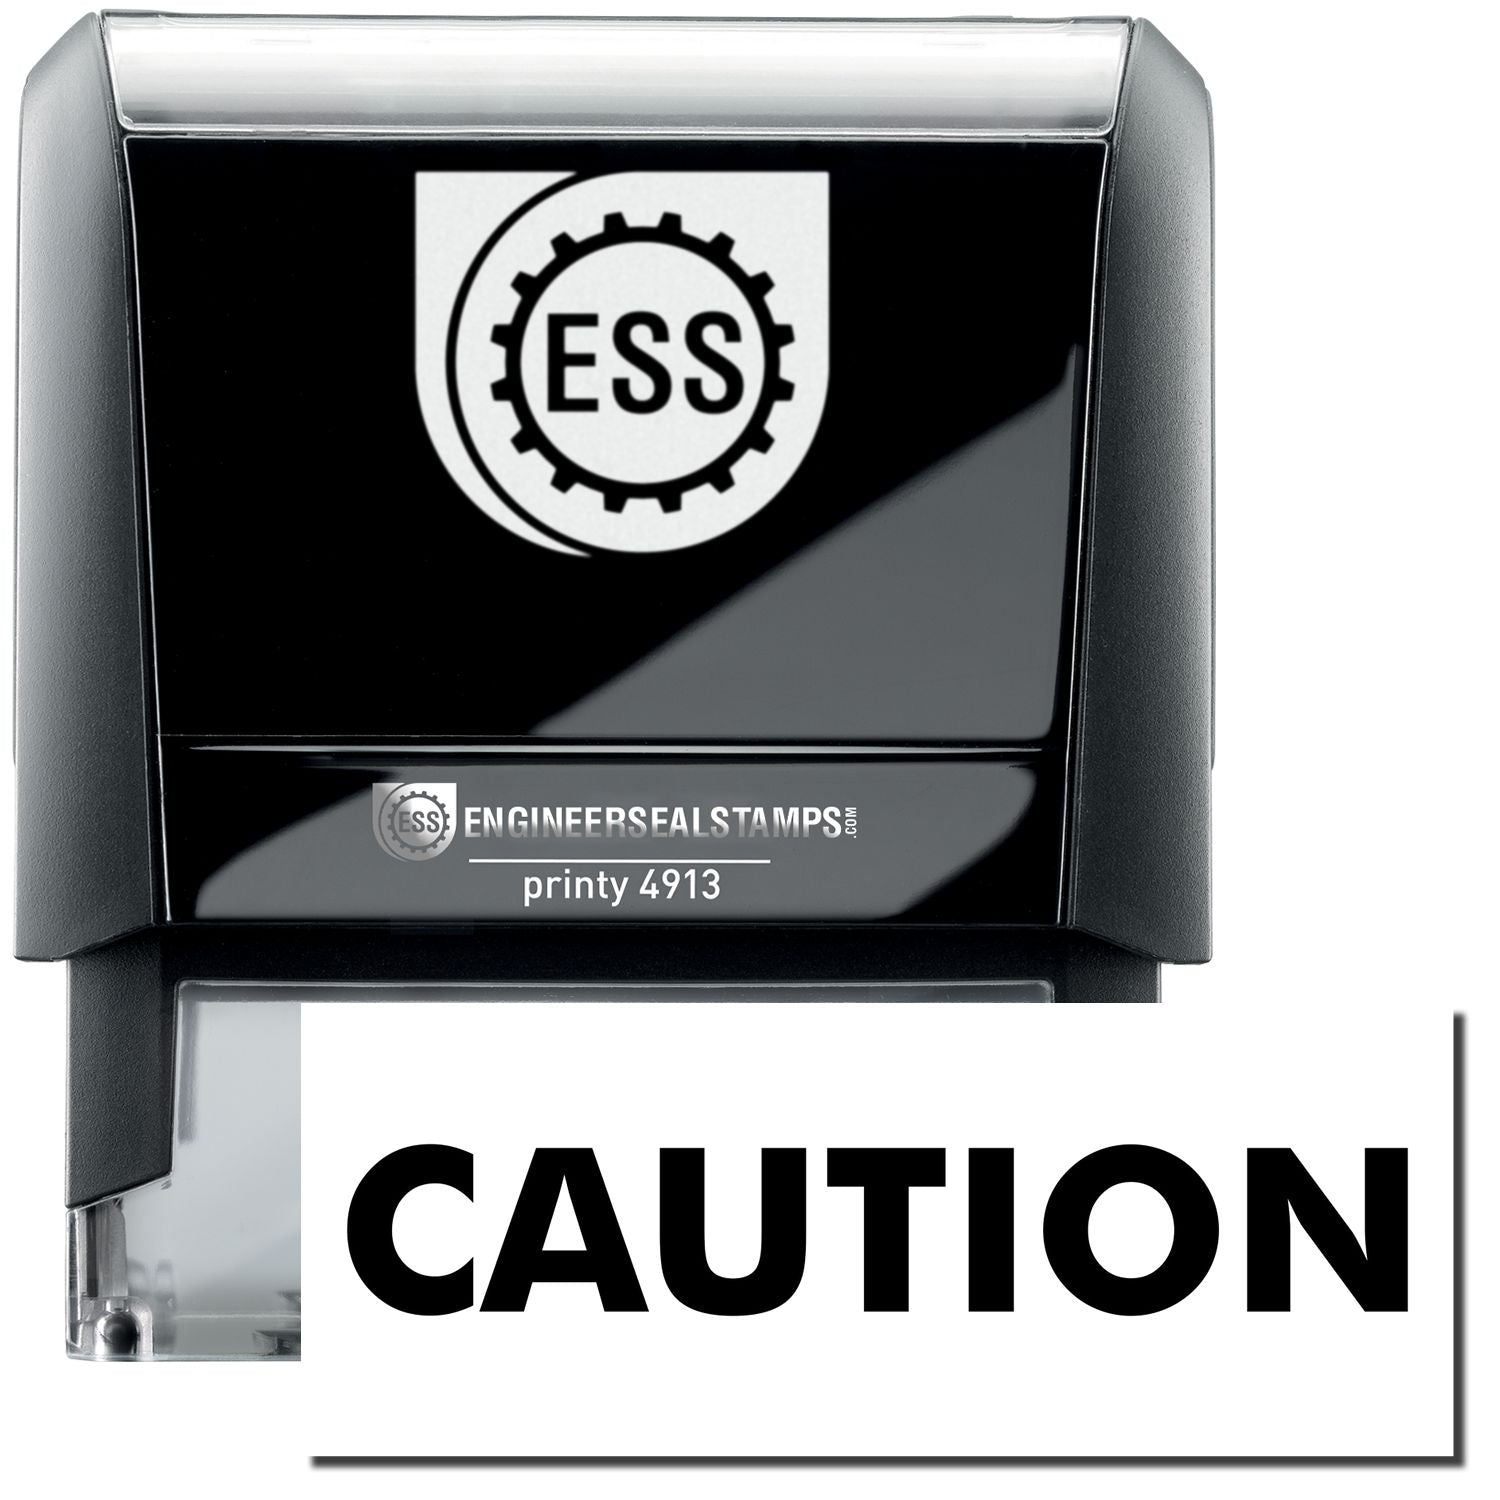 A self-inking stamp with a stamped image showing how the text "CAUTION" in a large bold font is displayed by it.